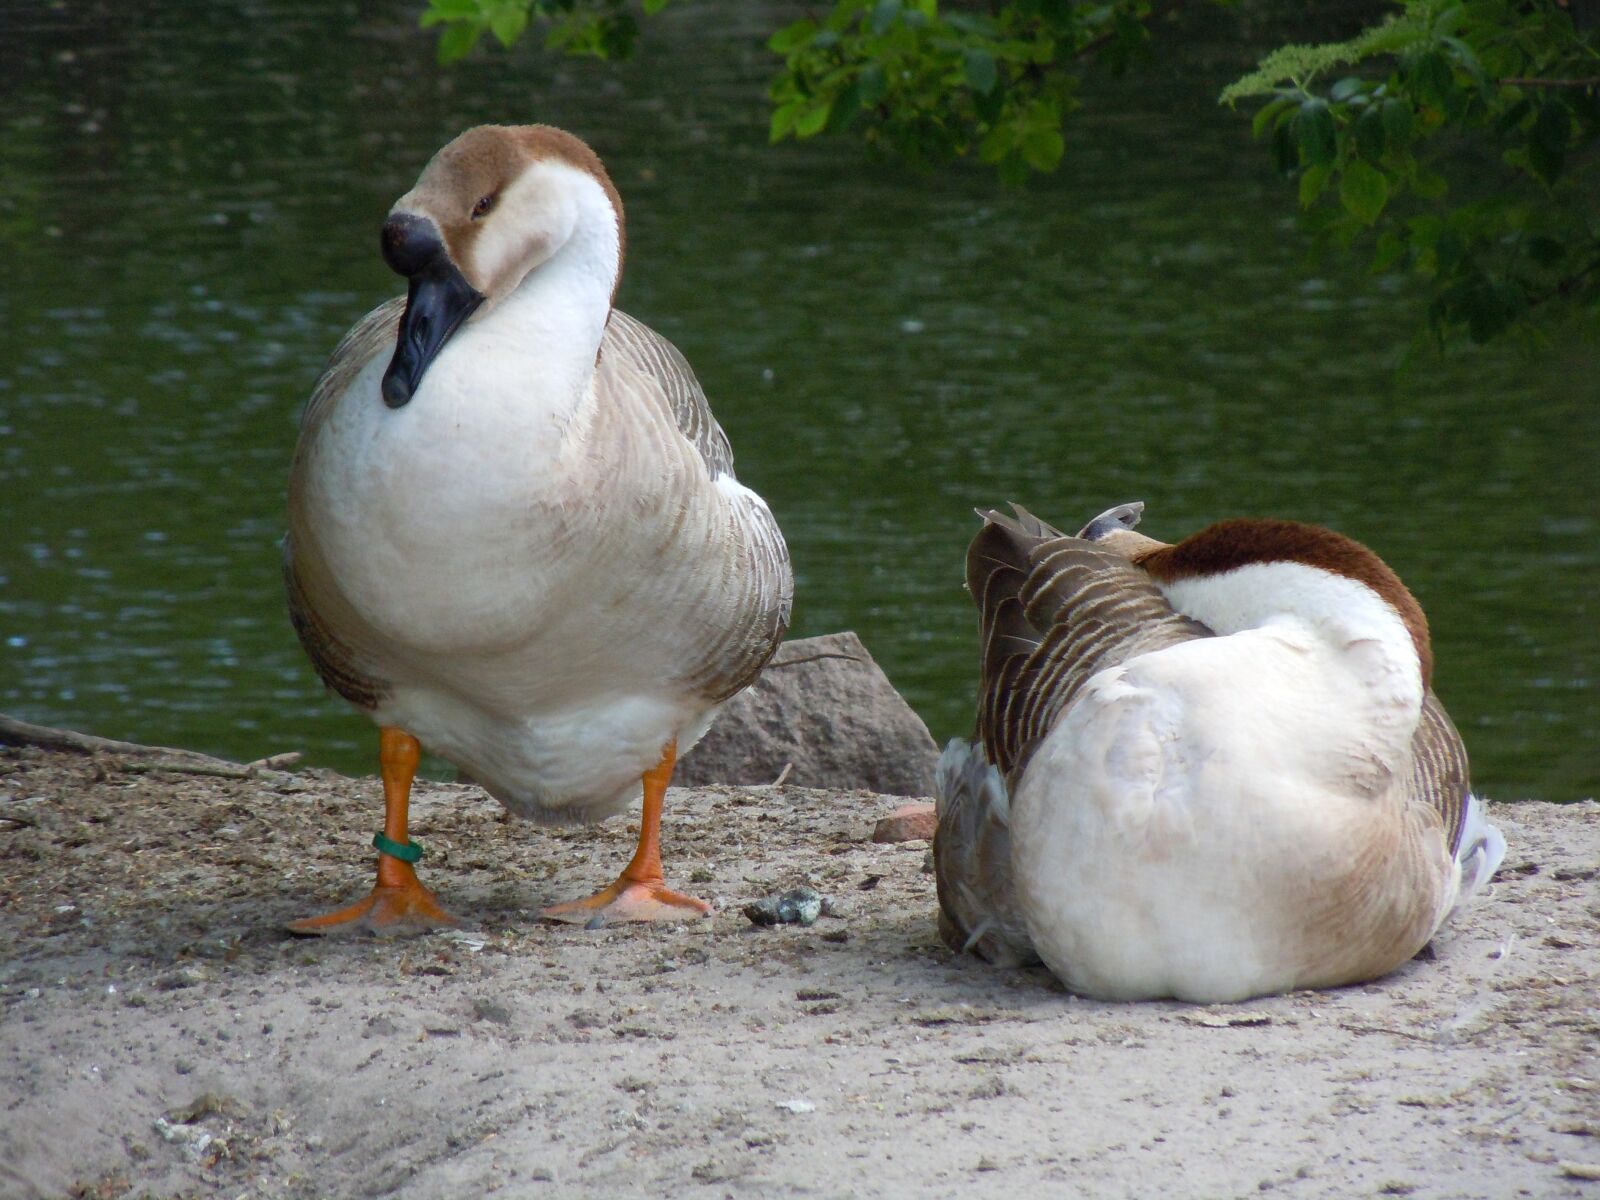 Nikon Coolpix S8000 sample photo. "Poultry, ducks, waterfowl" photography